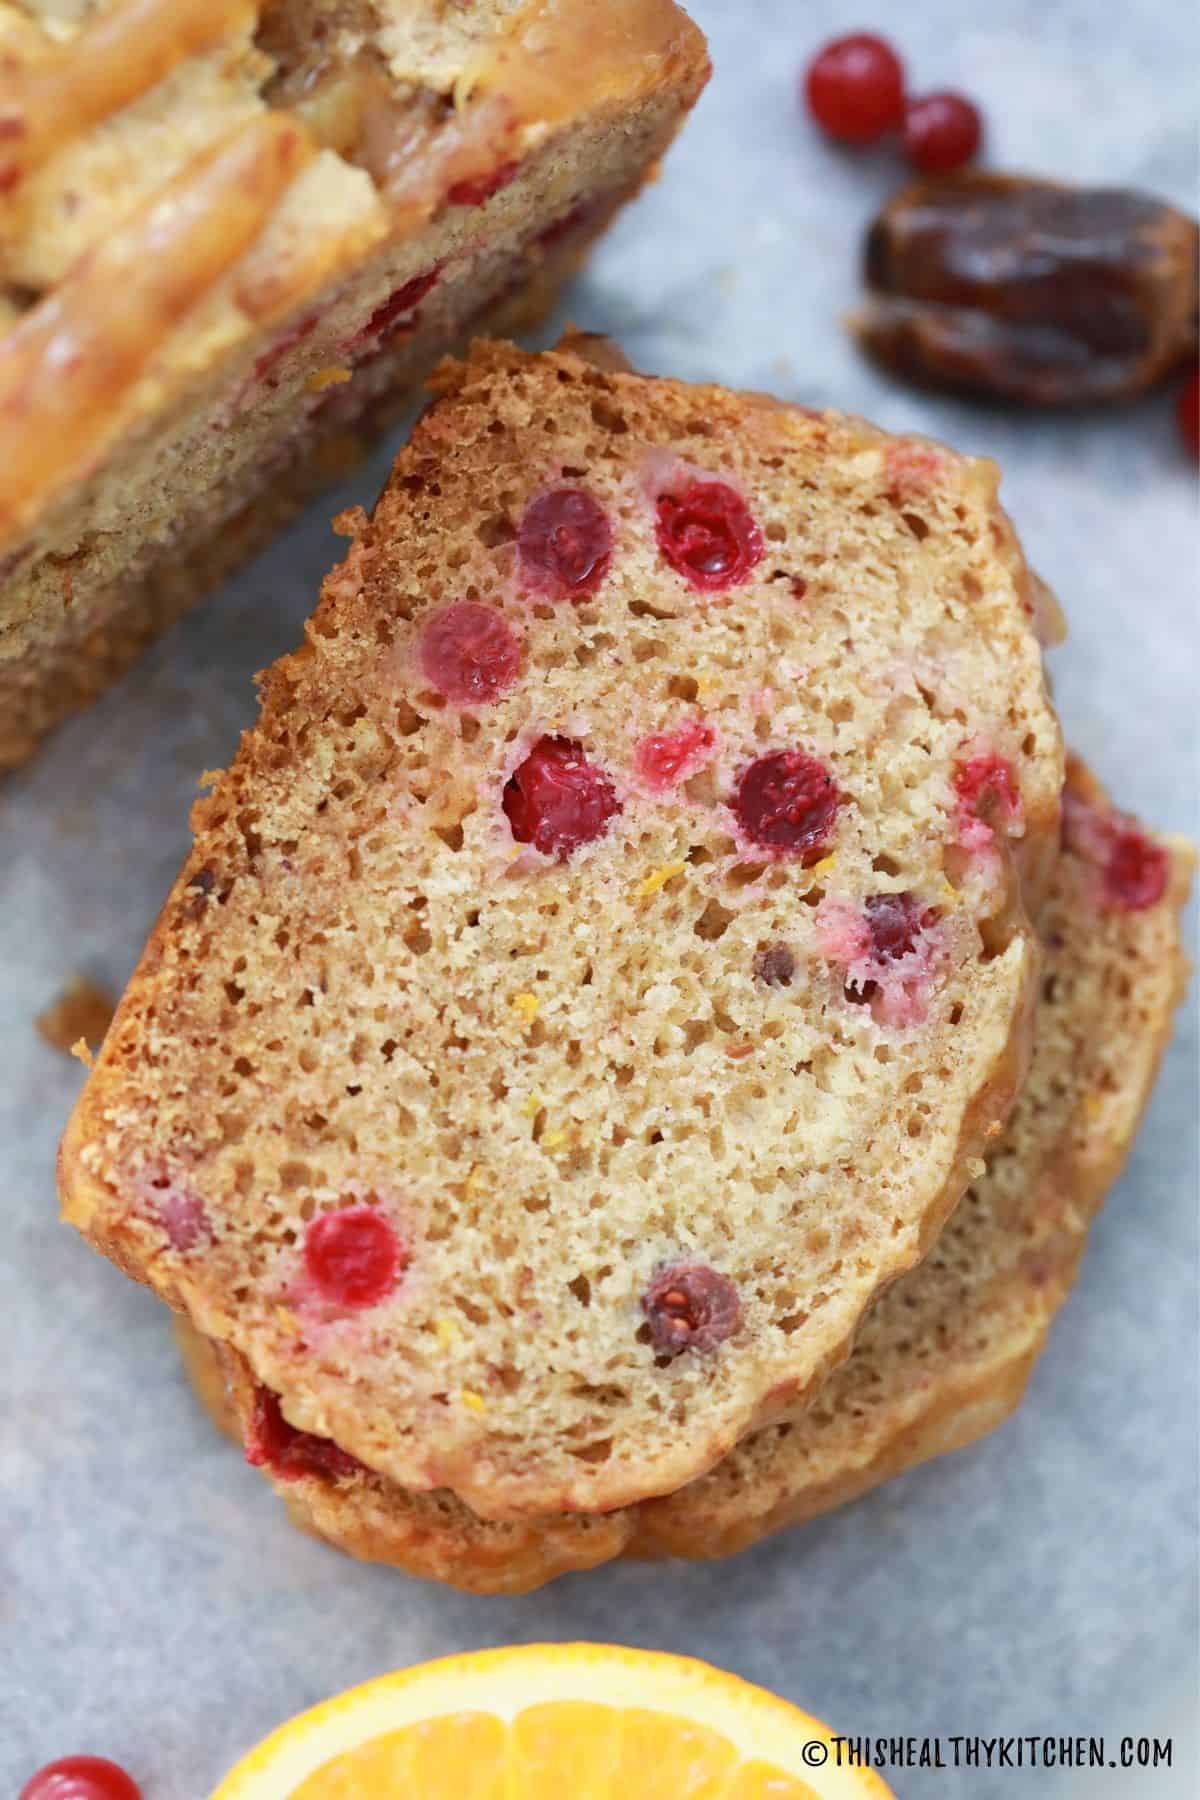 Two slices of stacked sweet bread with cranberries and loaf beside it.